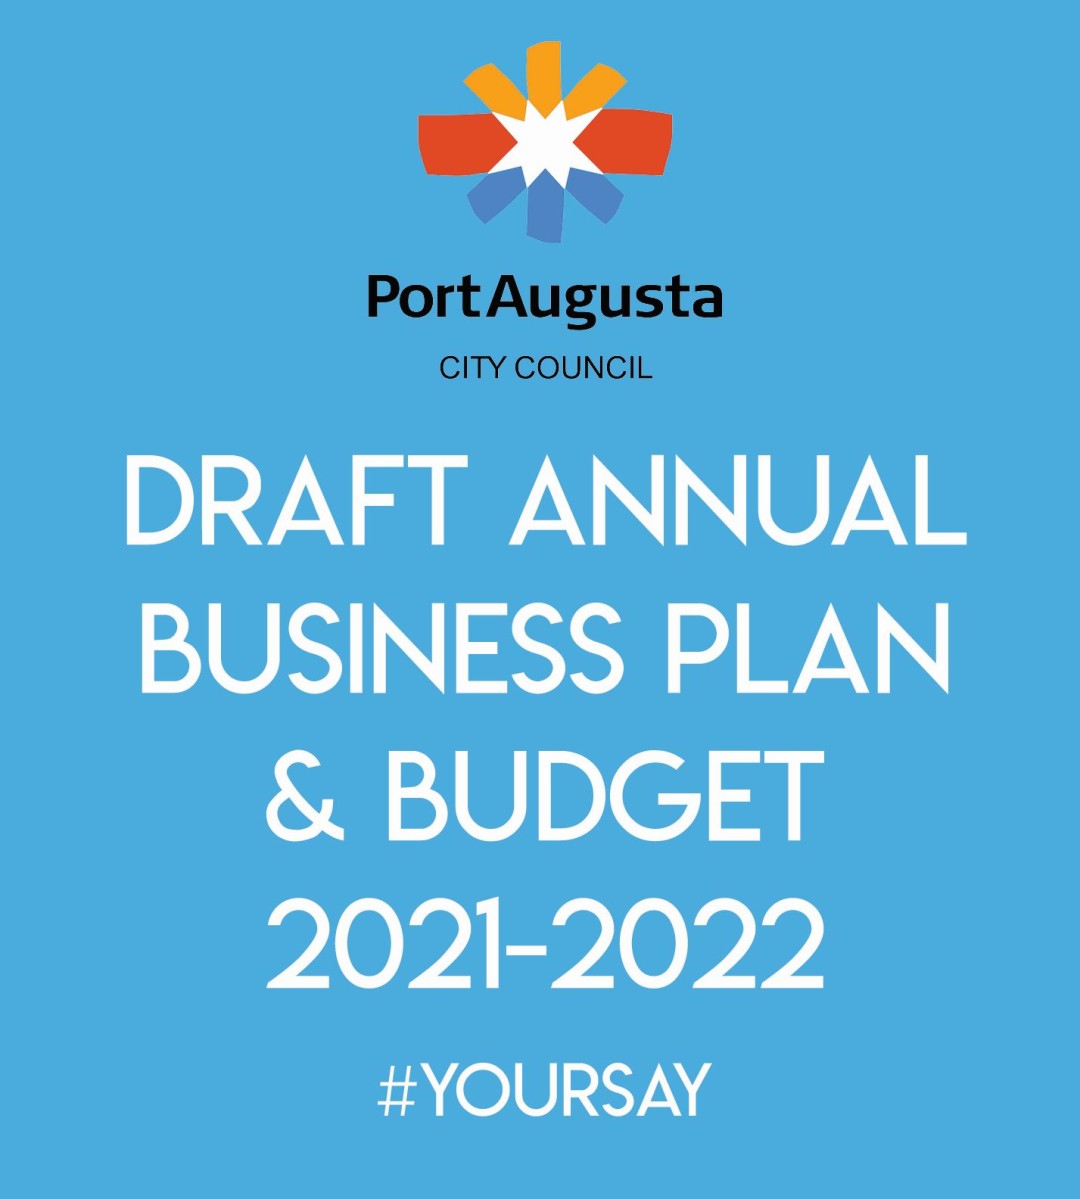 Draft Annual Business Plan & Budget 2021-2022 #YourSay